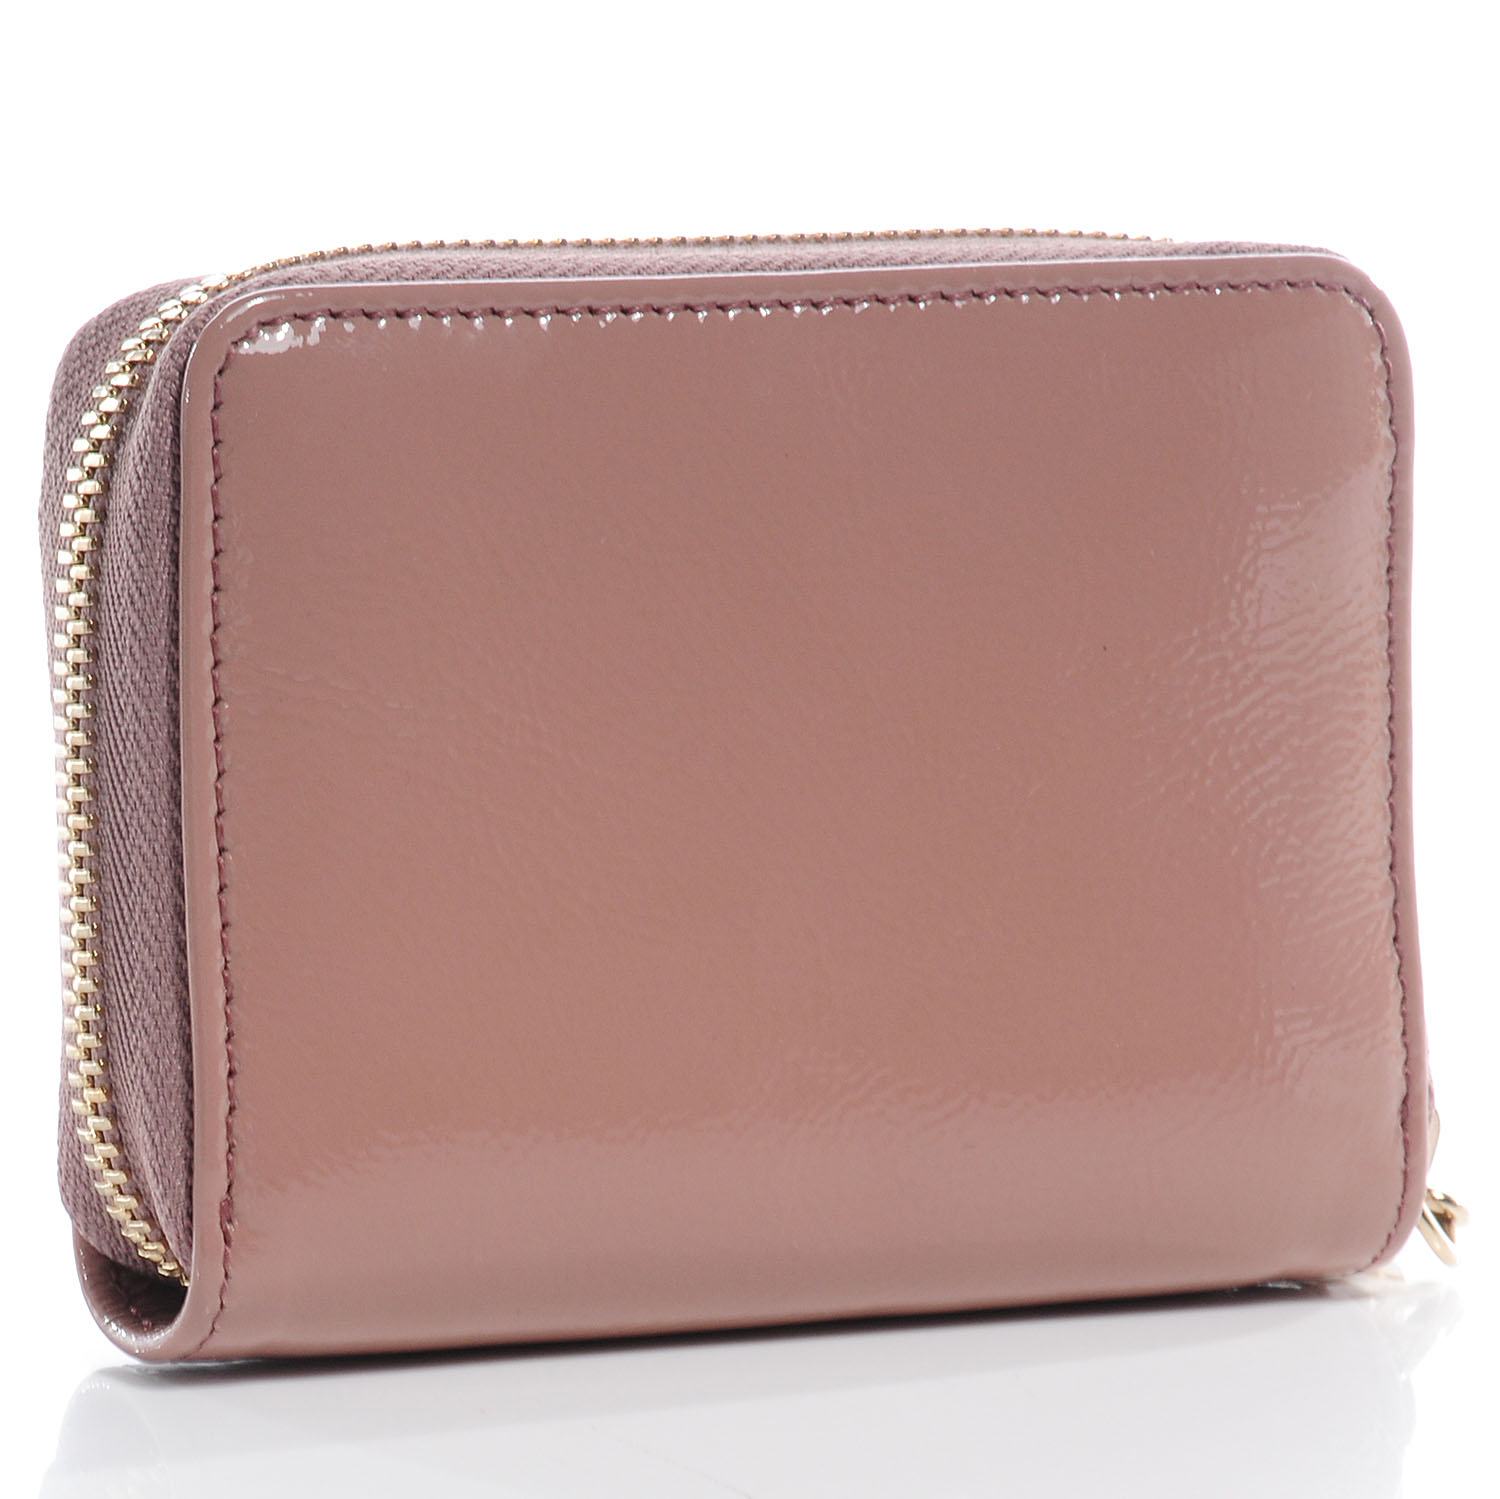 GUCCI Patent Leather Soho Compact Wallet Blush Pink 61654